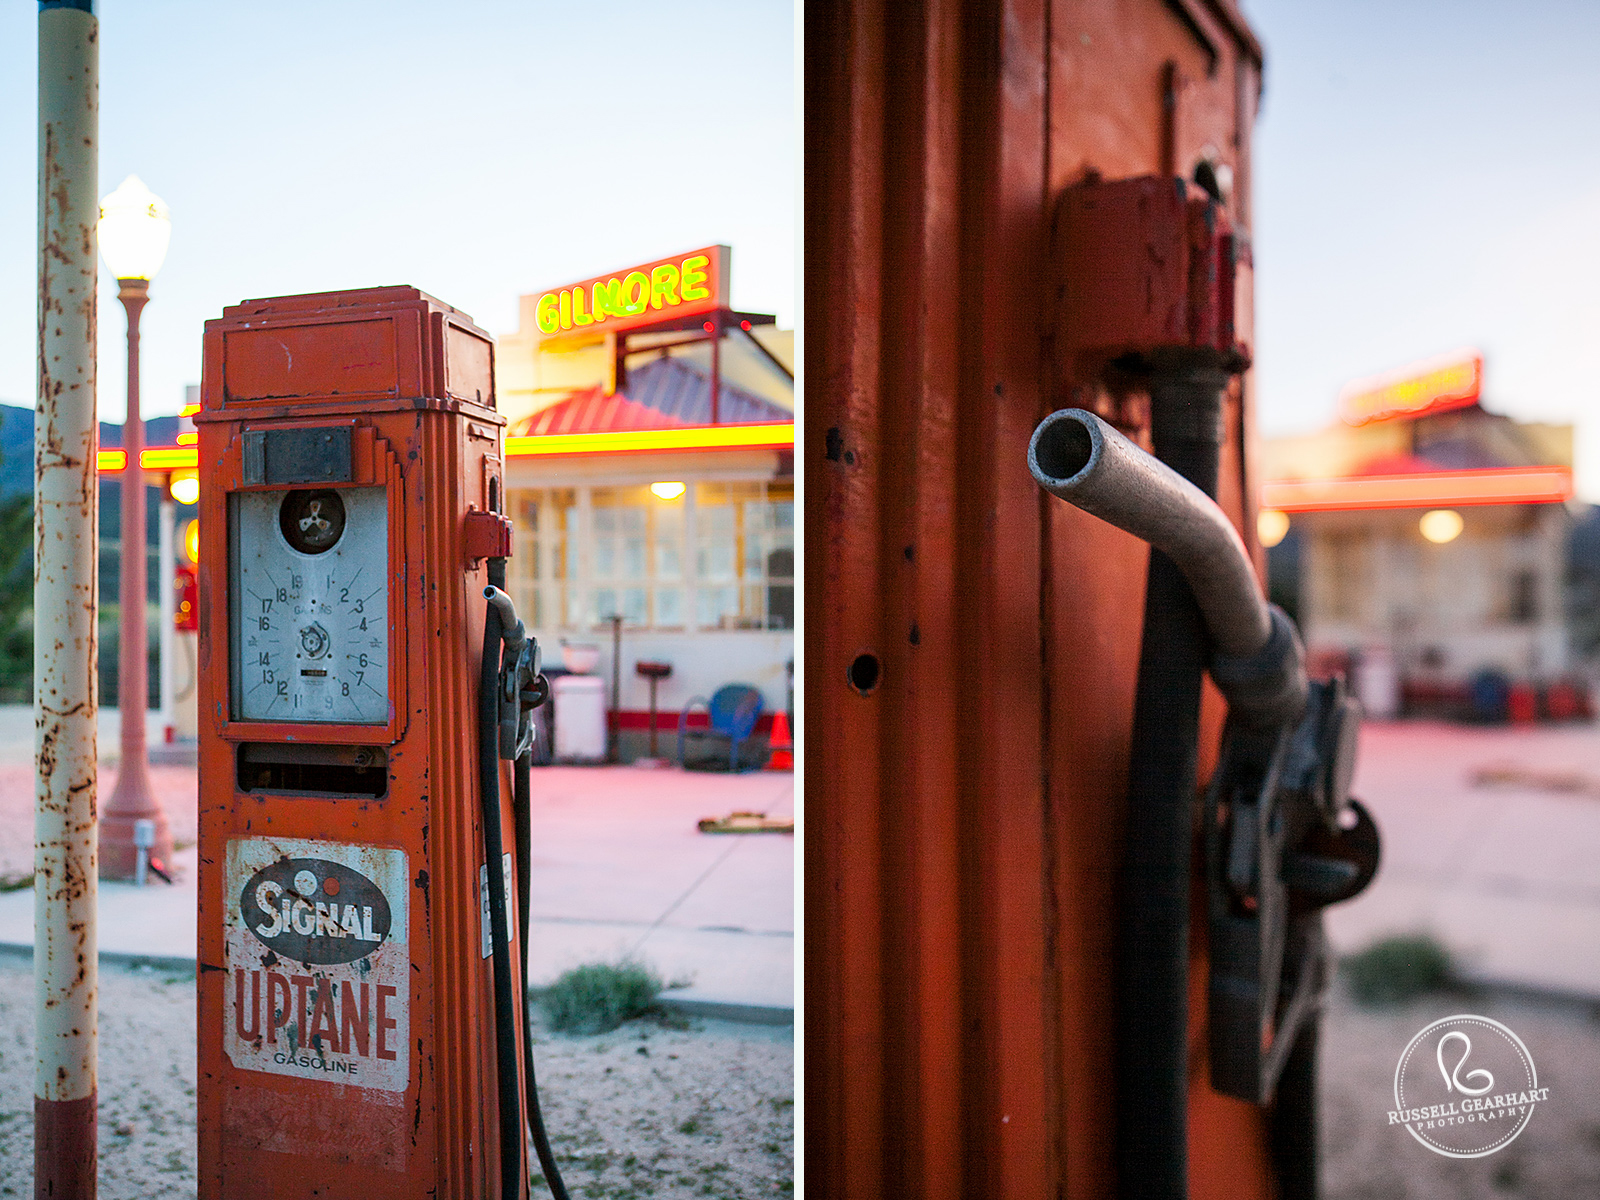 Gilmore Gas Station Pump – Vintage Los Angeles Engagement Location – Russell Gearhart Photography – www.gearhartphoto.com